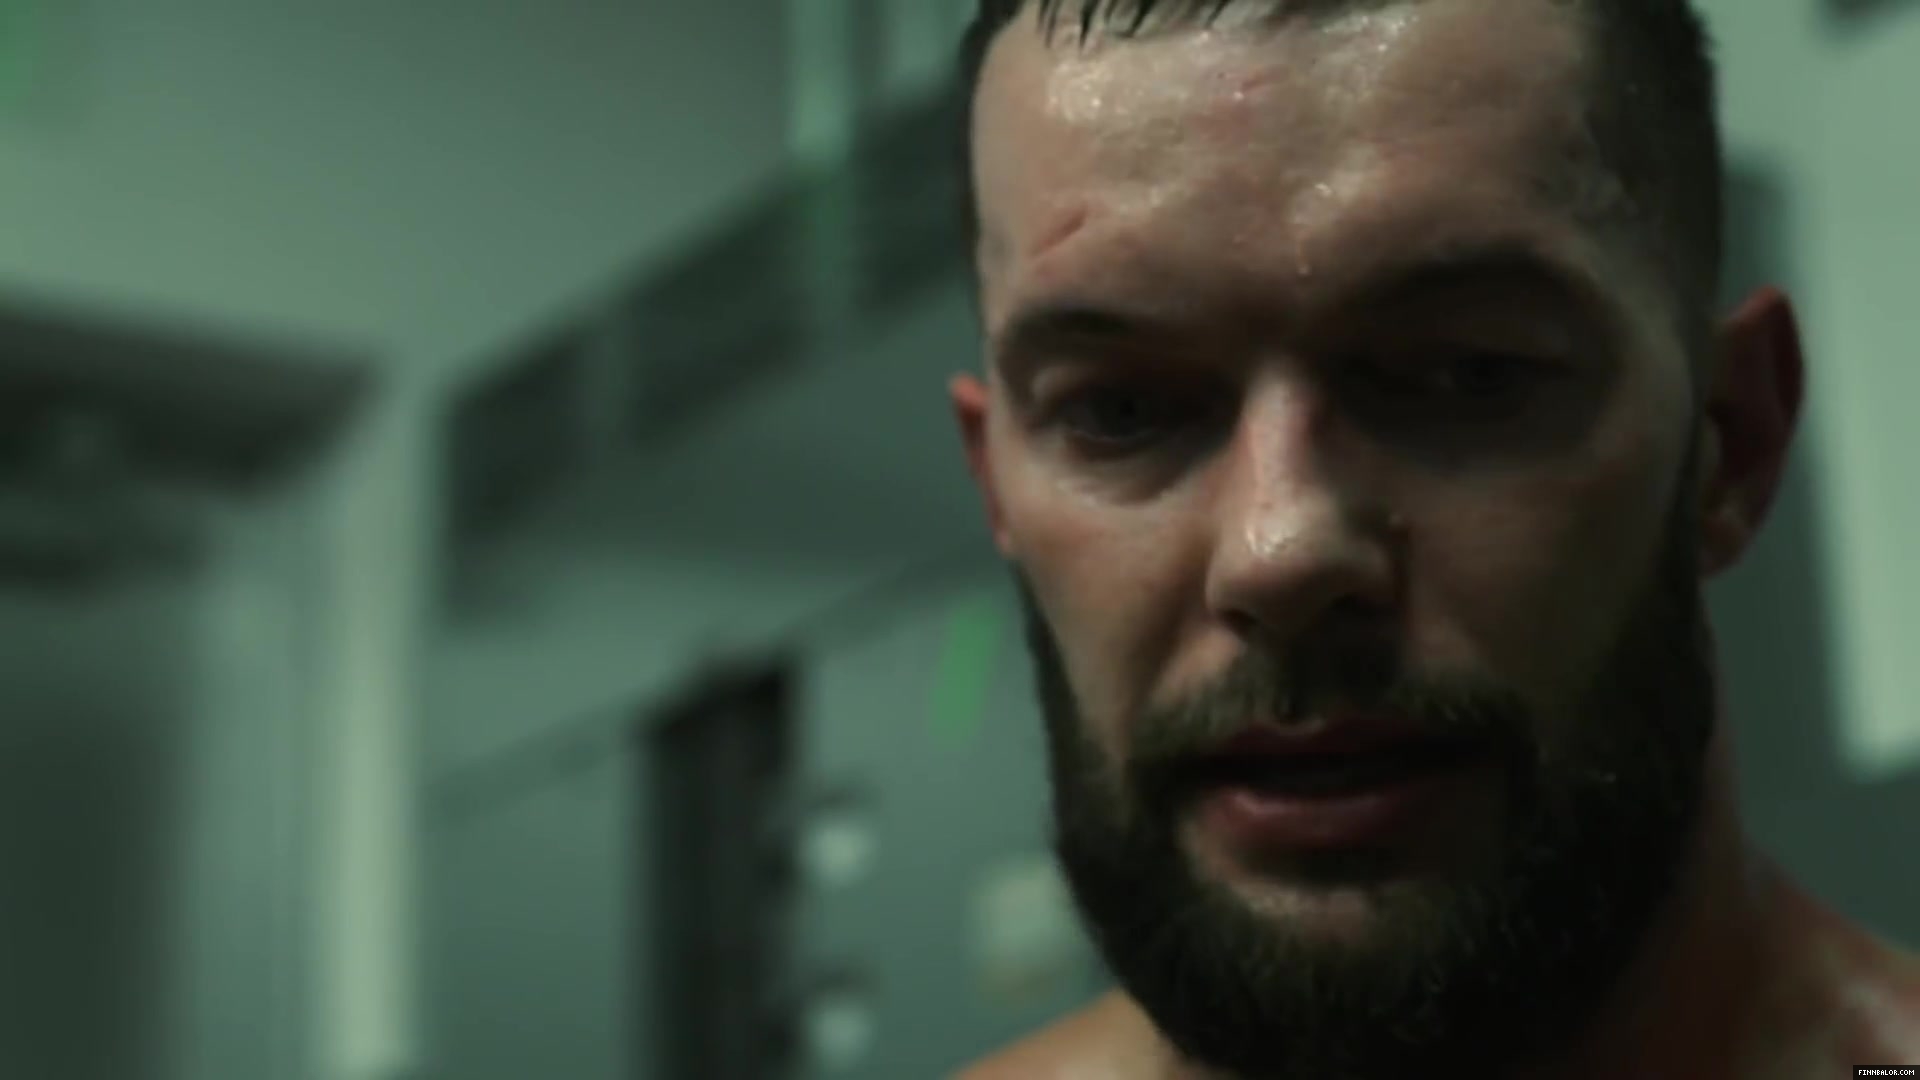 Finn_Balor___The_Rising_of_the_Prince_in_NXT_265.jpg